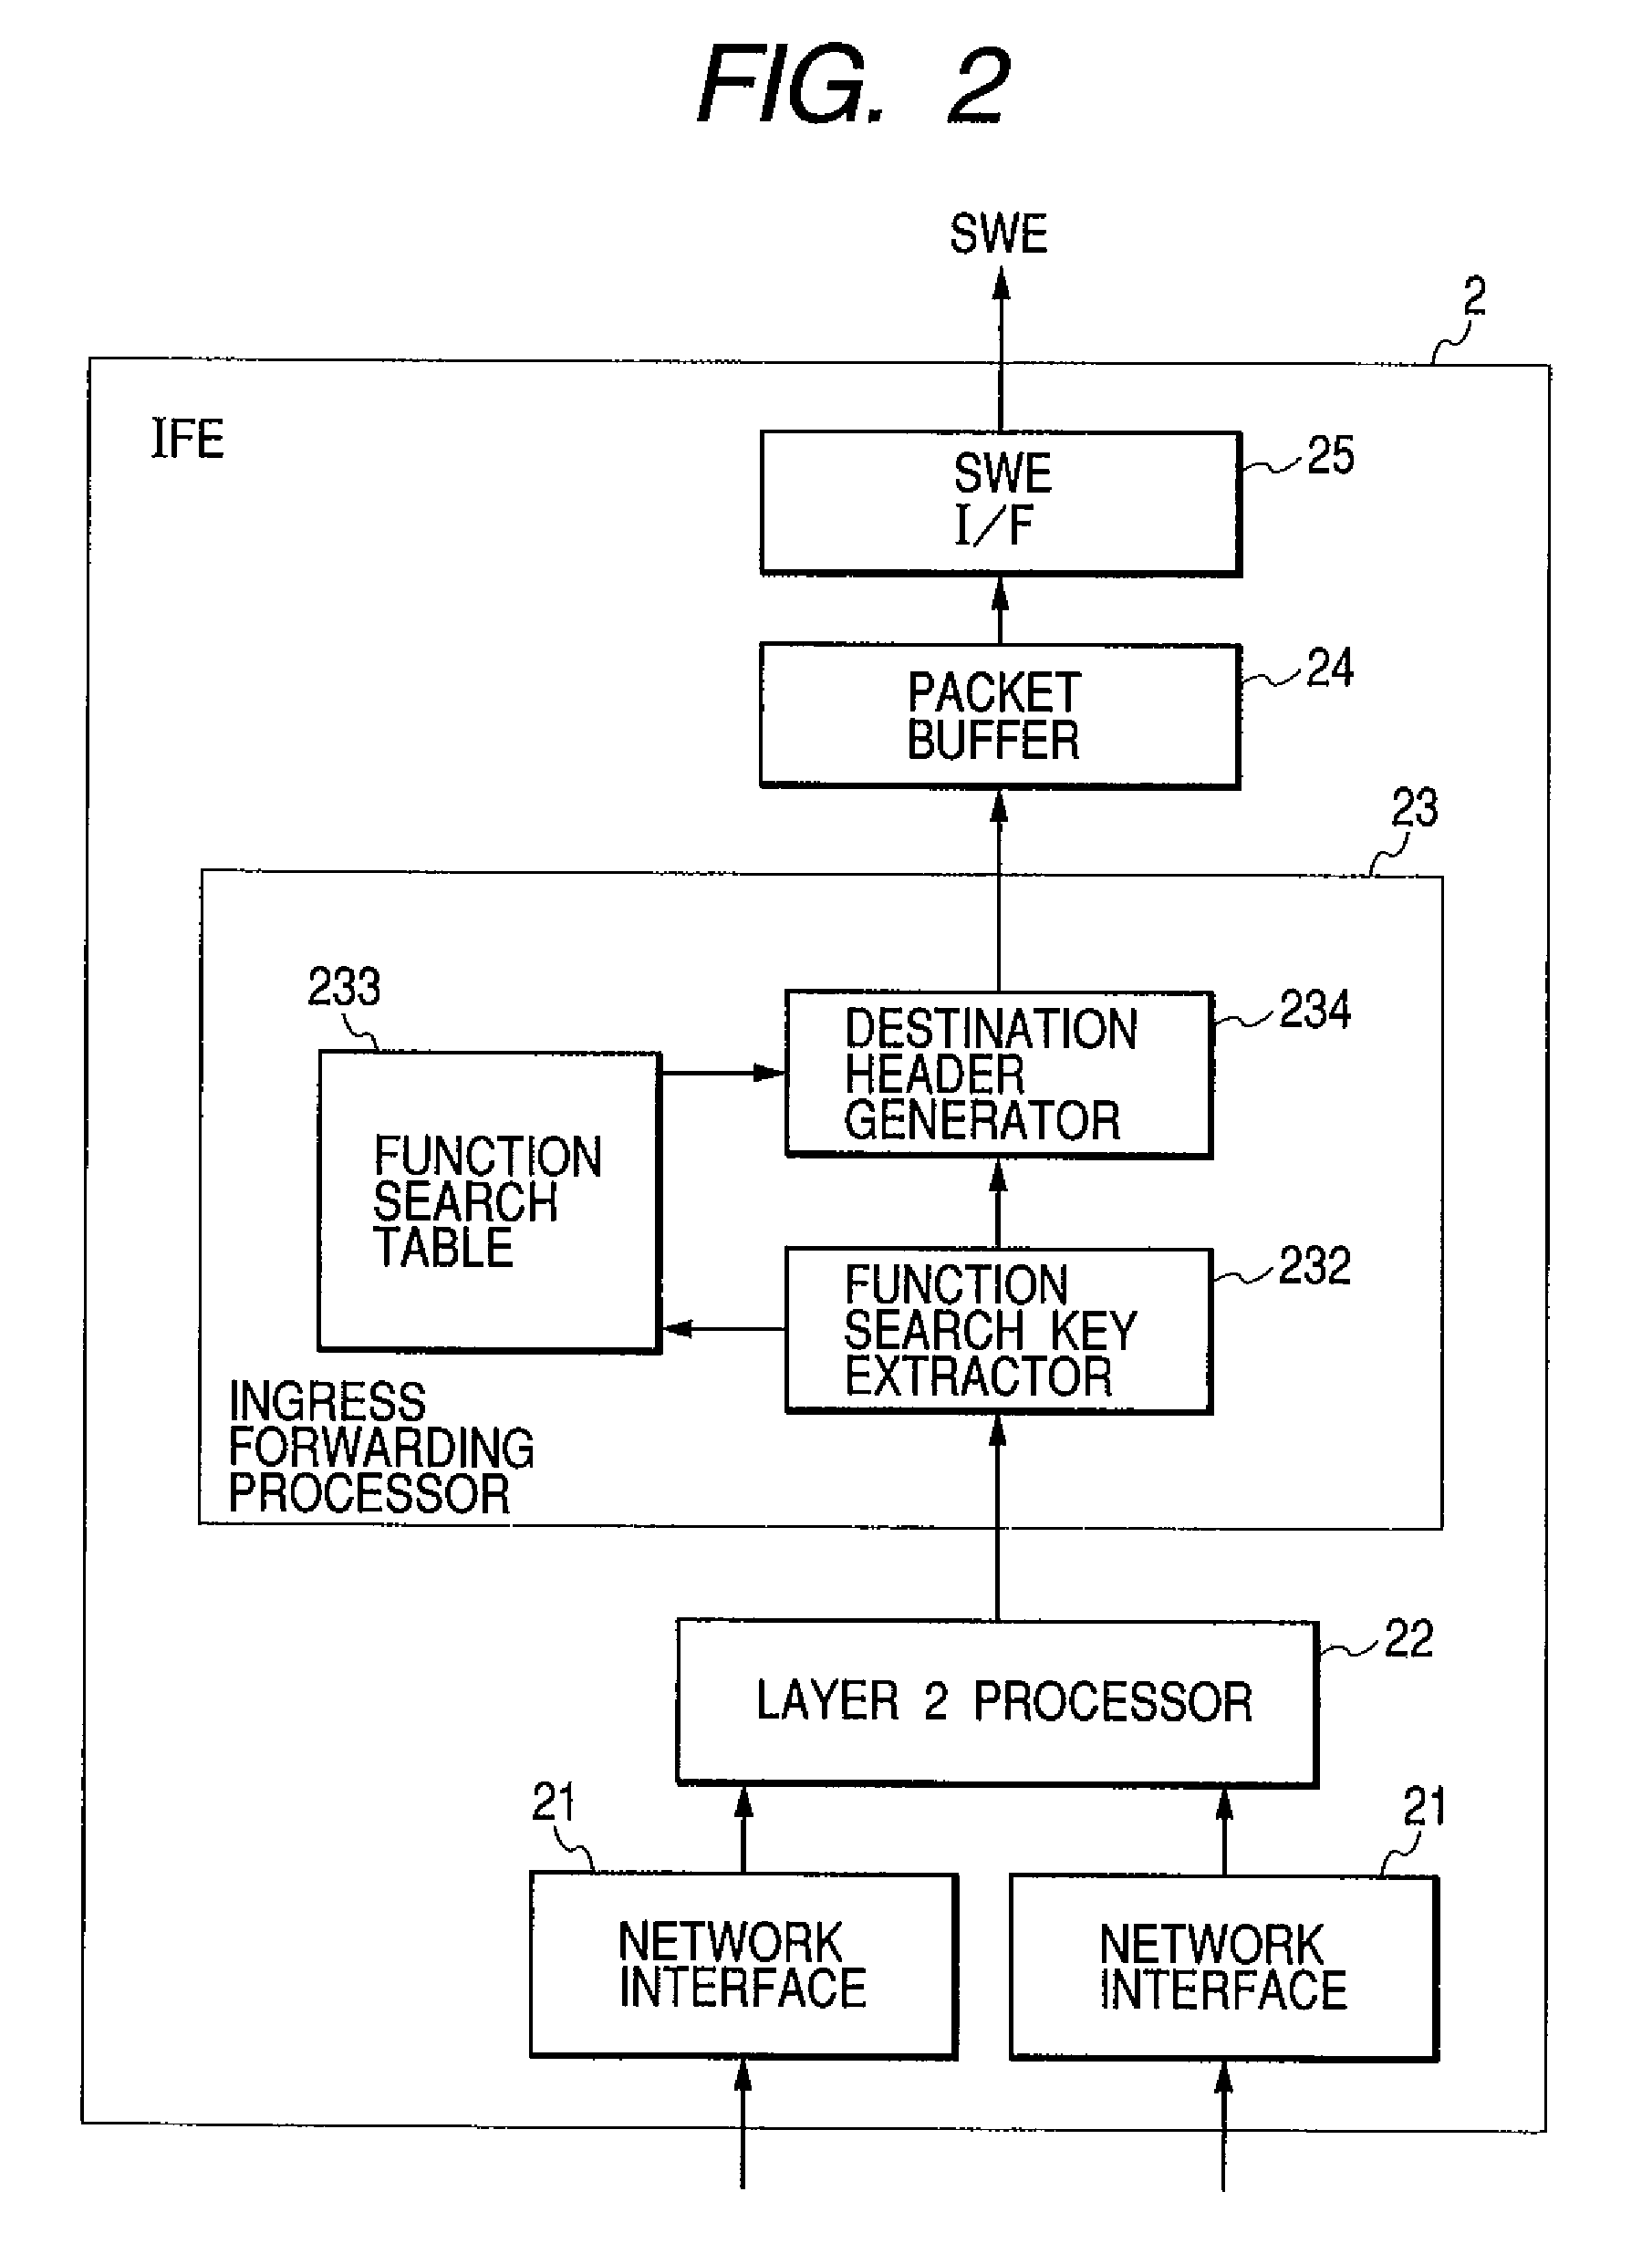 Packet communication device